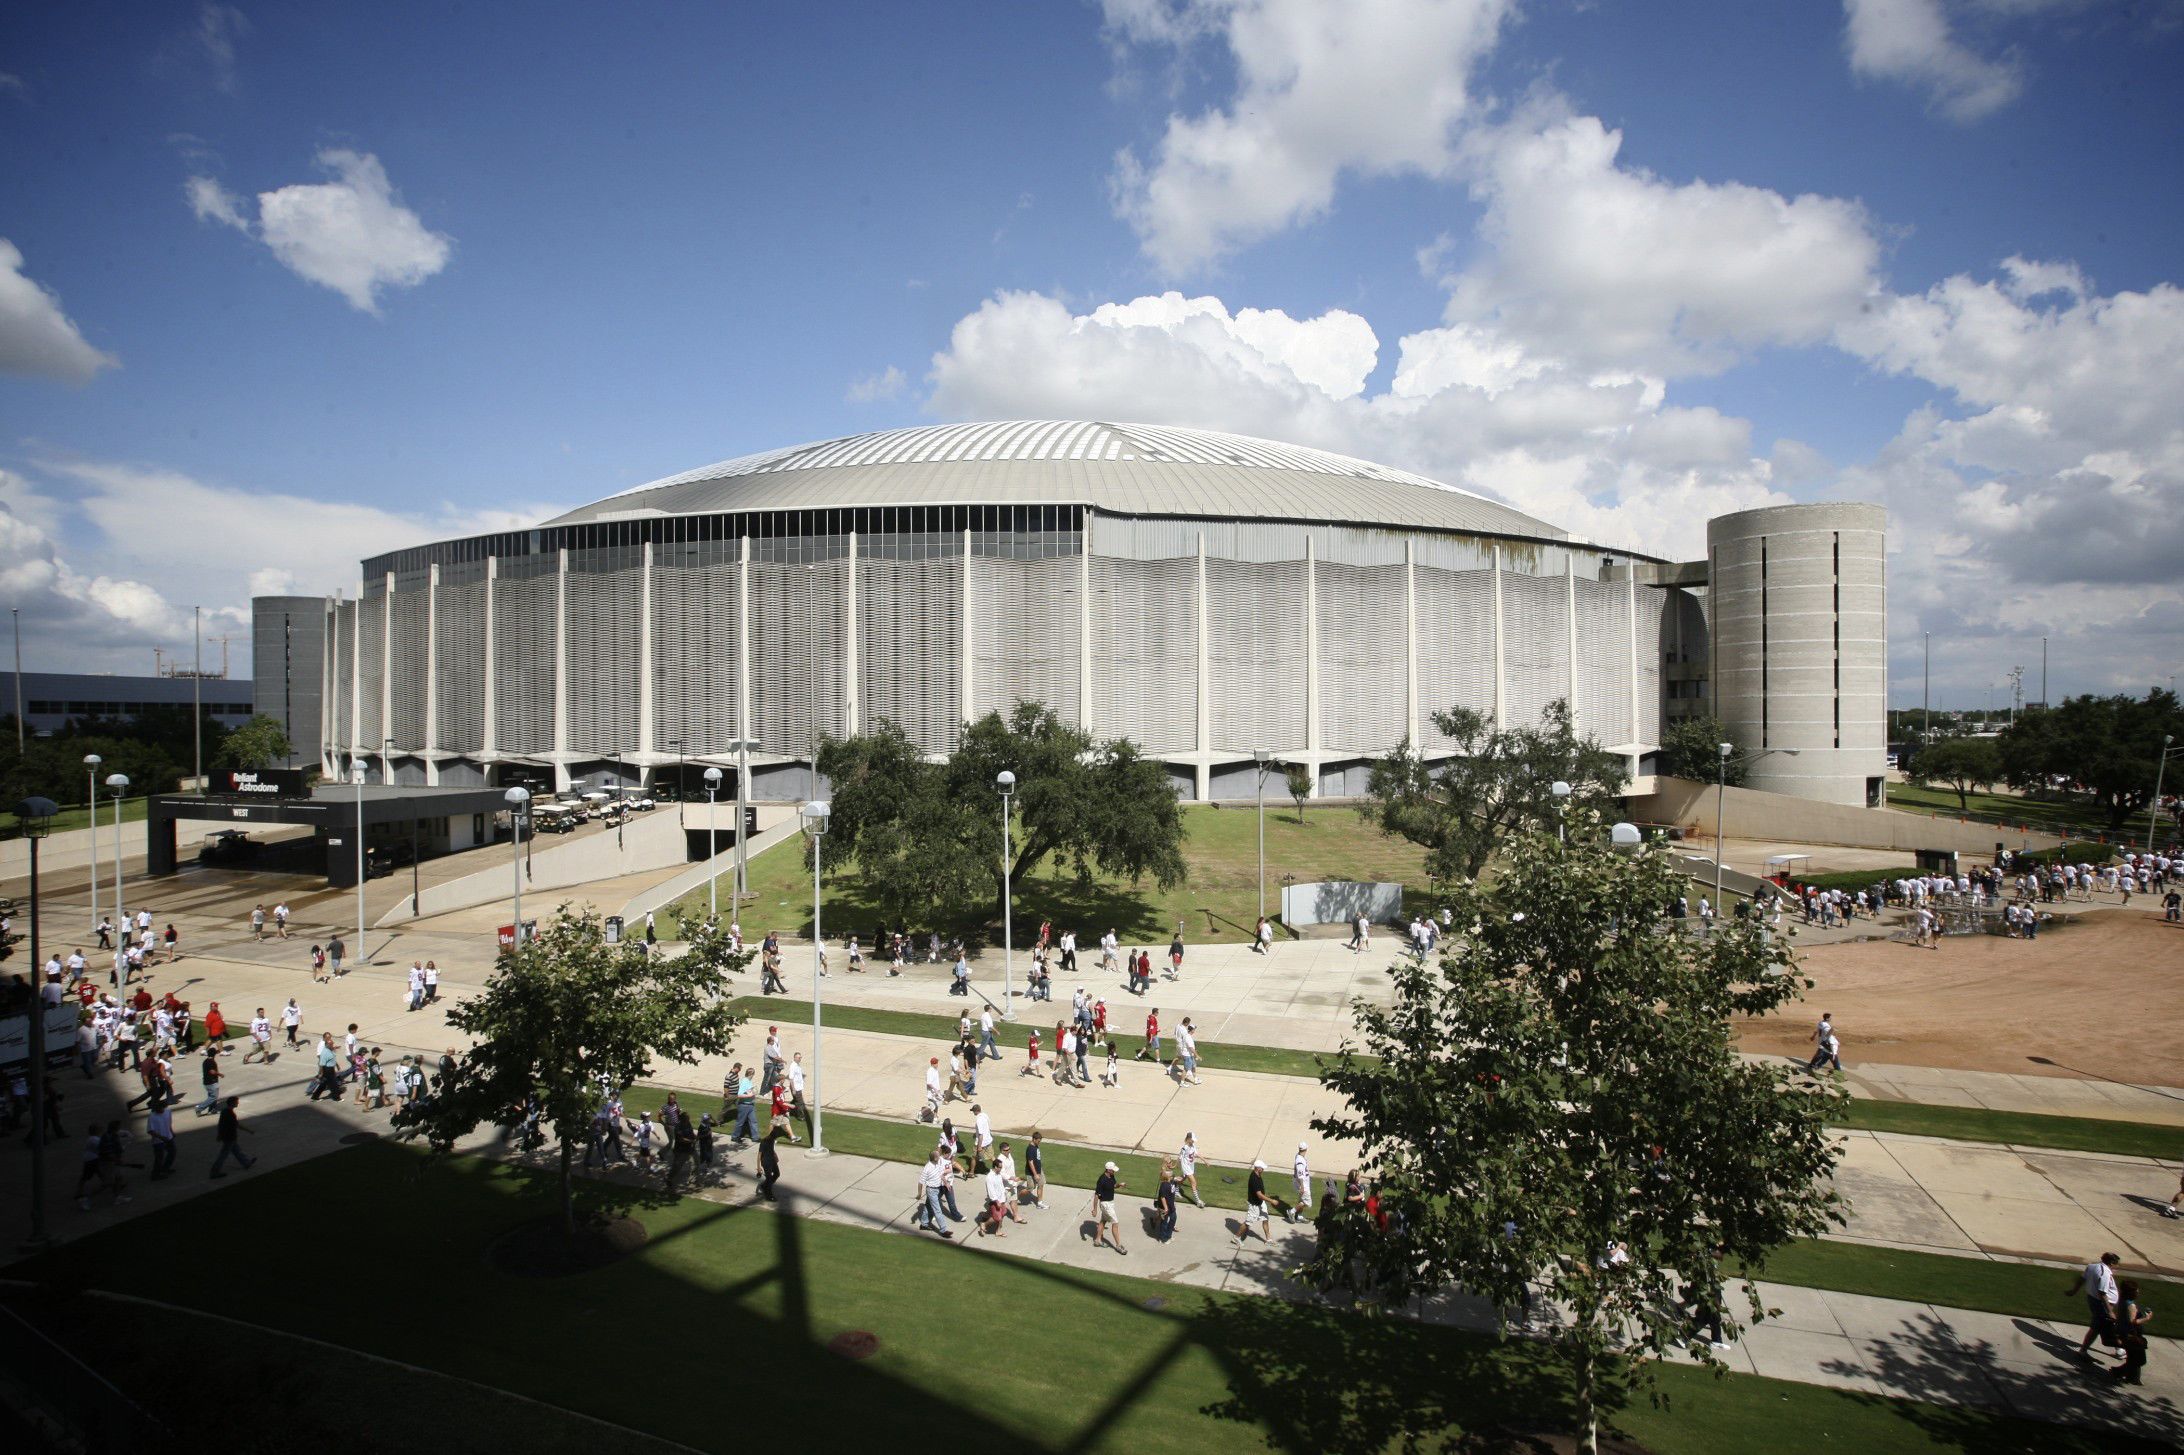 Texans debate future of 45-year old Astrodome